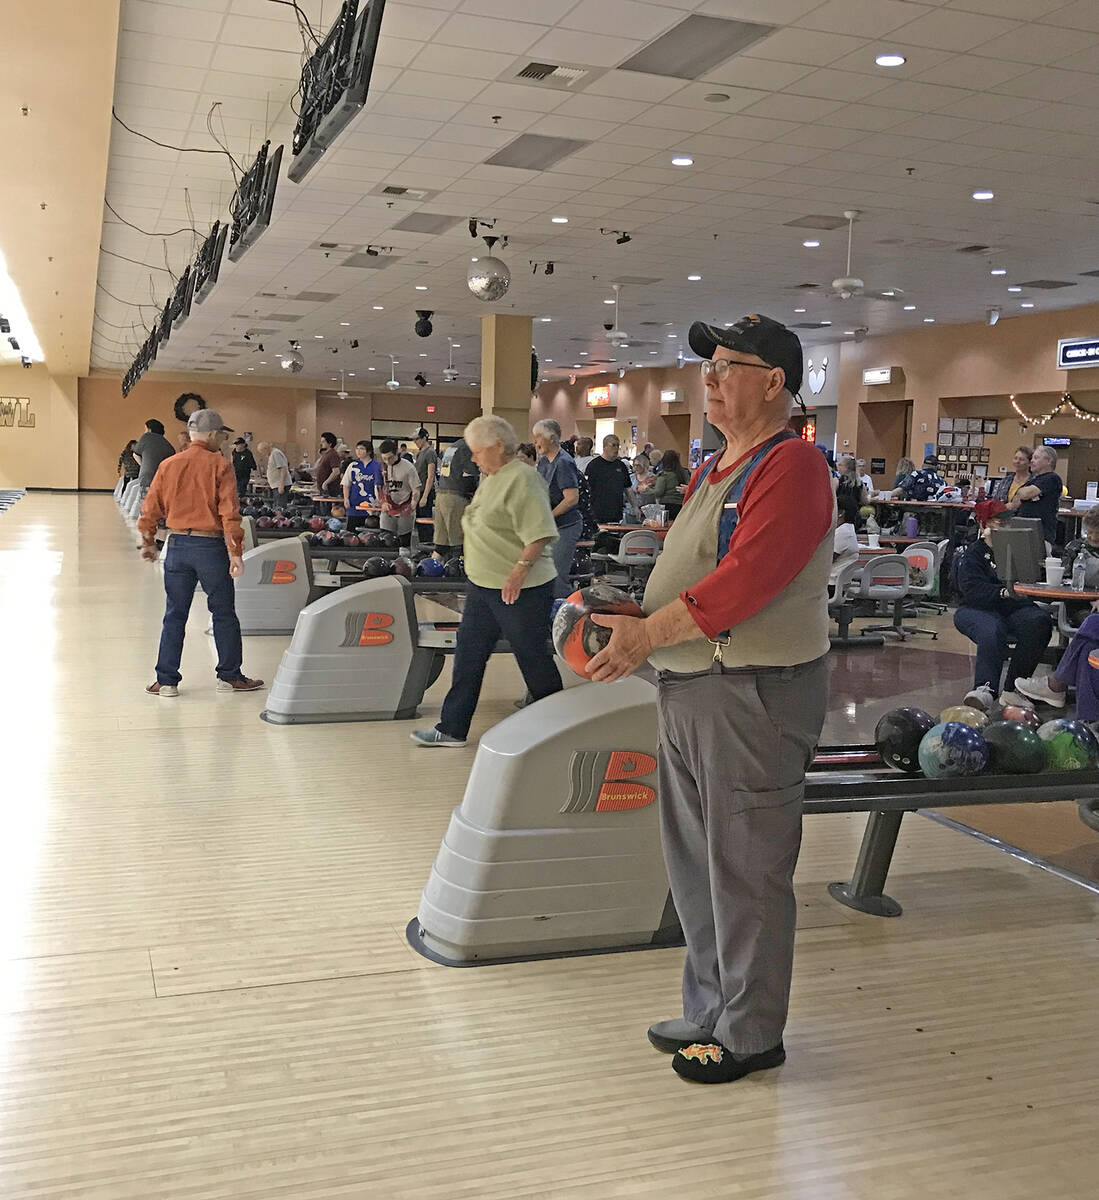 Robin Hebrock/Pahrump Valley Times A bowler pauses to ready himself before launching his ball d ...